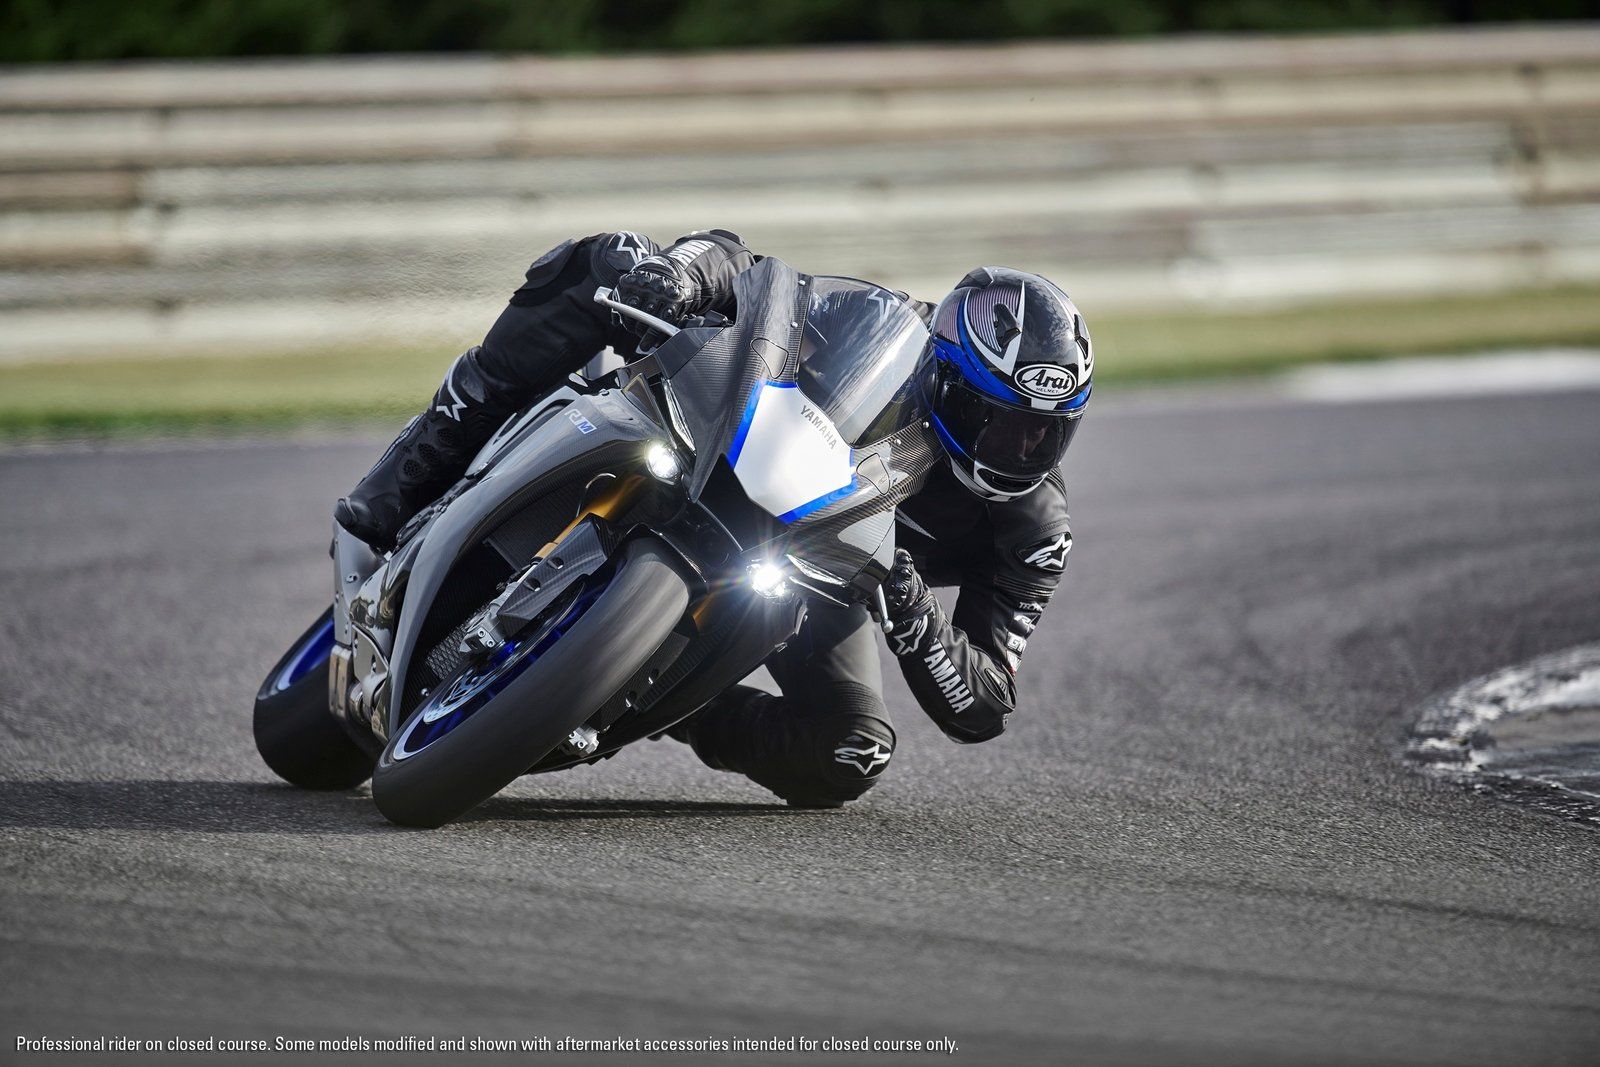 Yamaha YZF R1 / R1M Picture, Photo, Wallpaper And Video